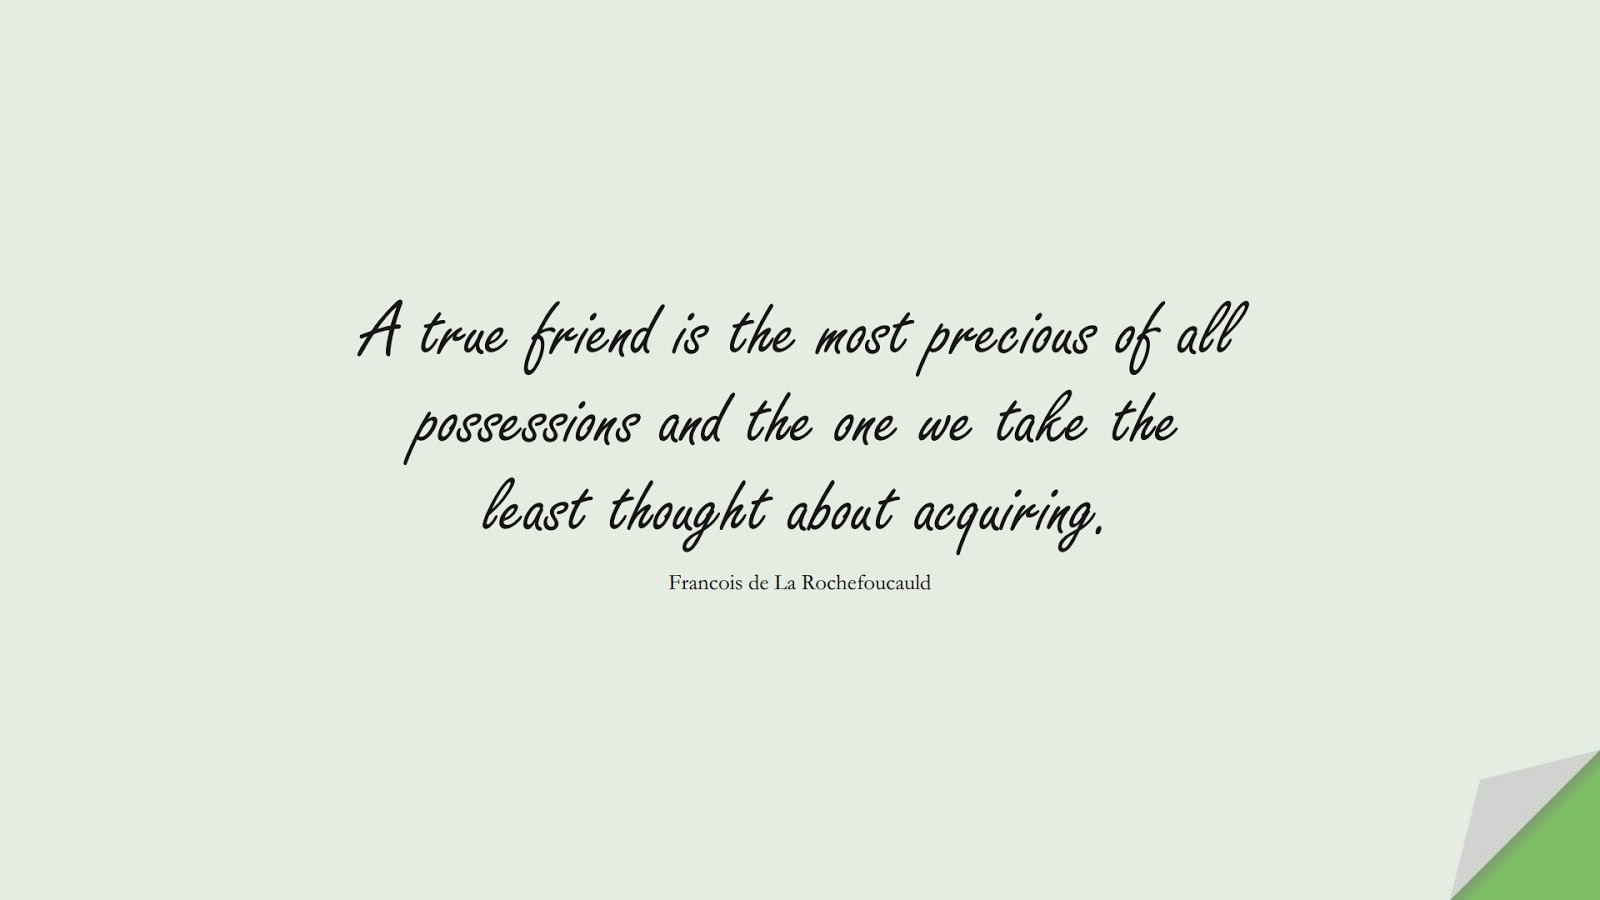 A true friend is the most precious of all possessions and the one we take the least thought about acquiring. (Francois de La Rochefoucauld);  #FriendshipQuotes